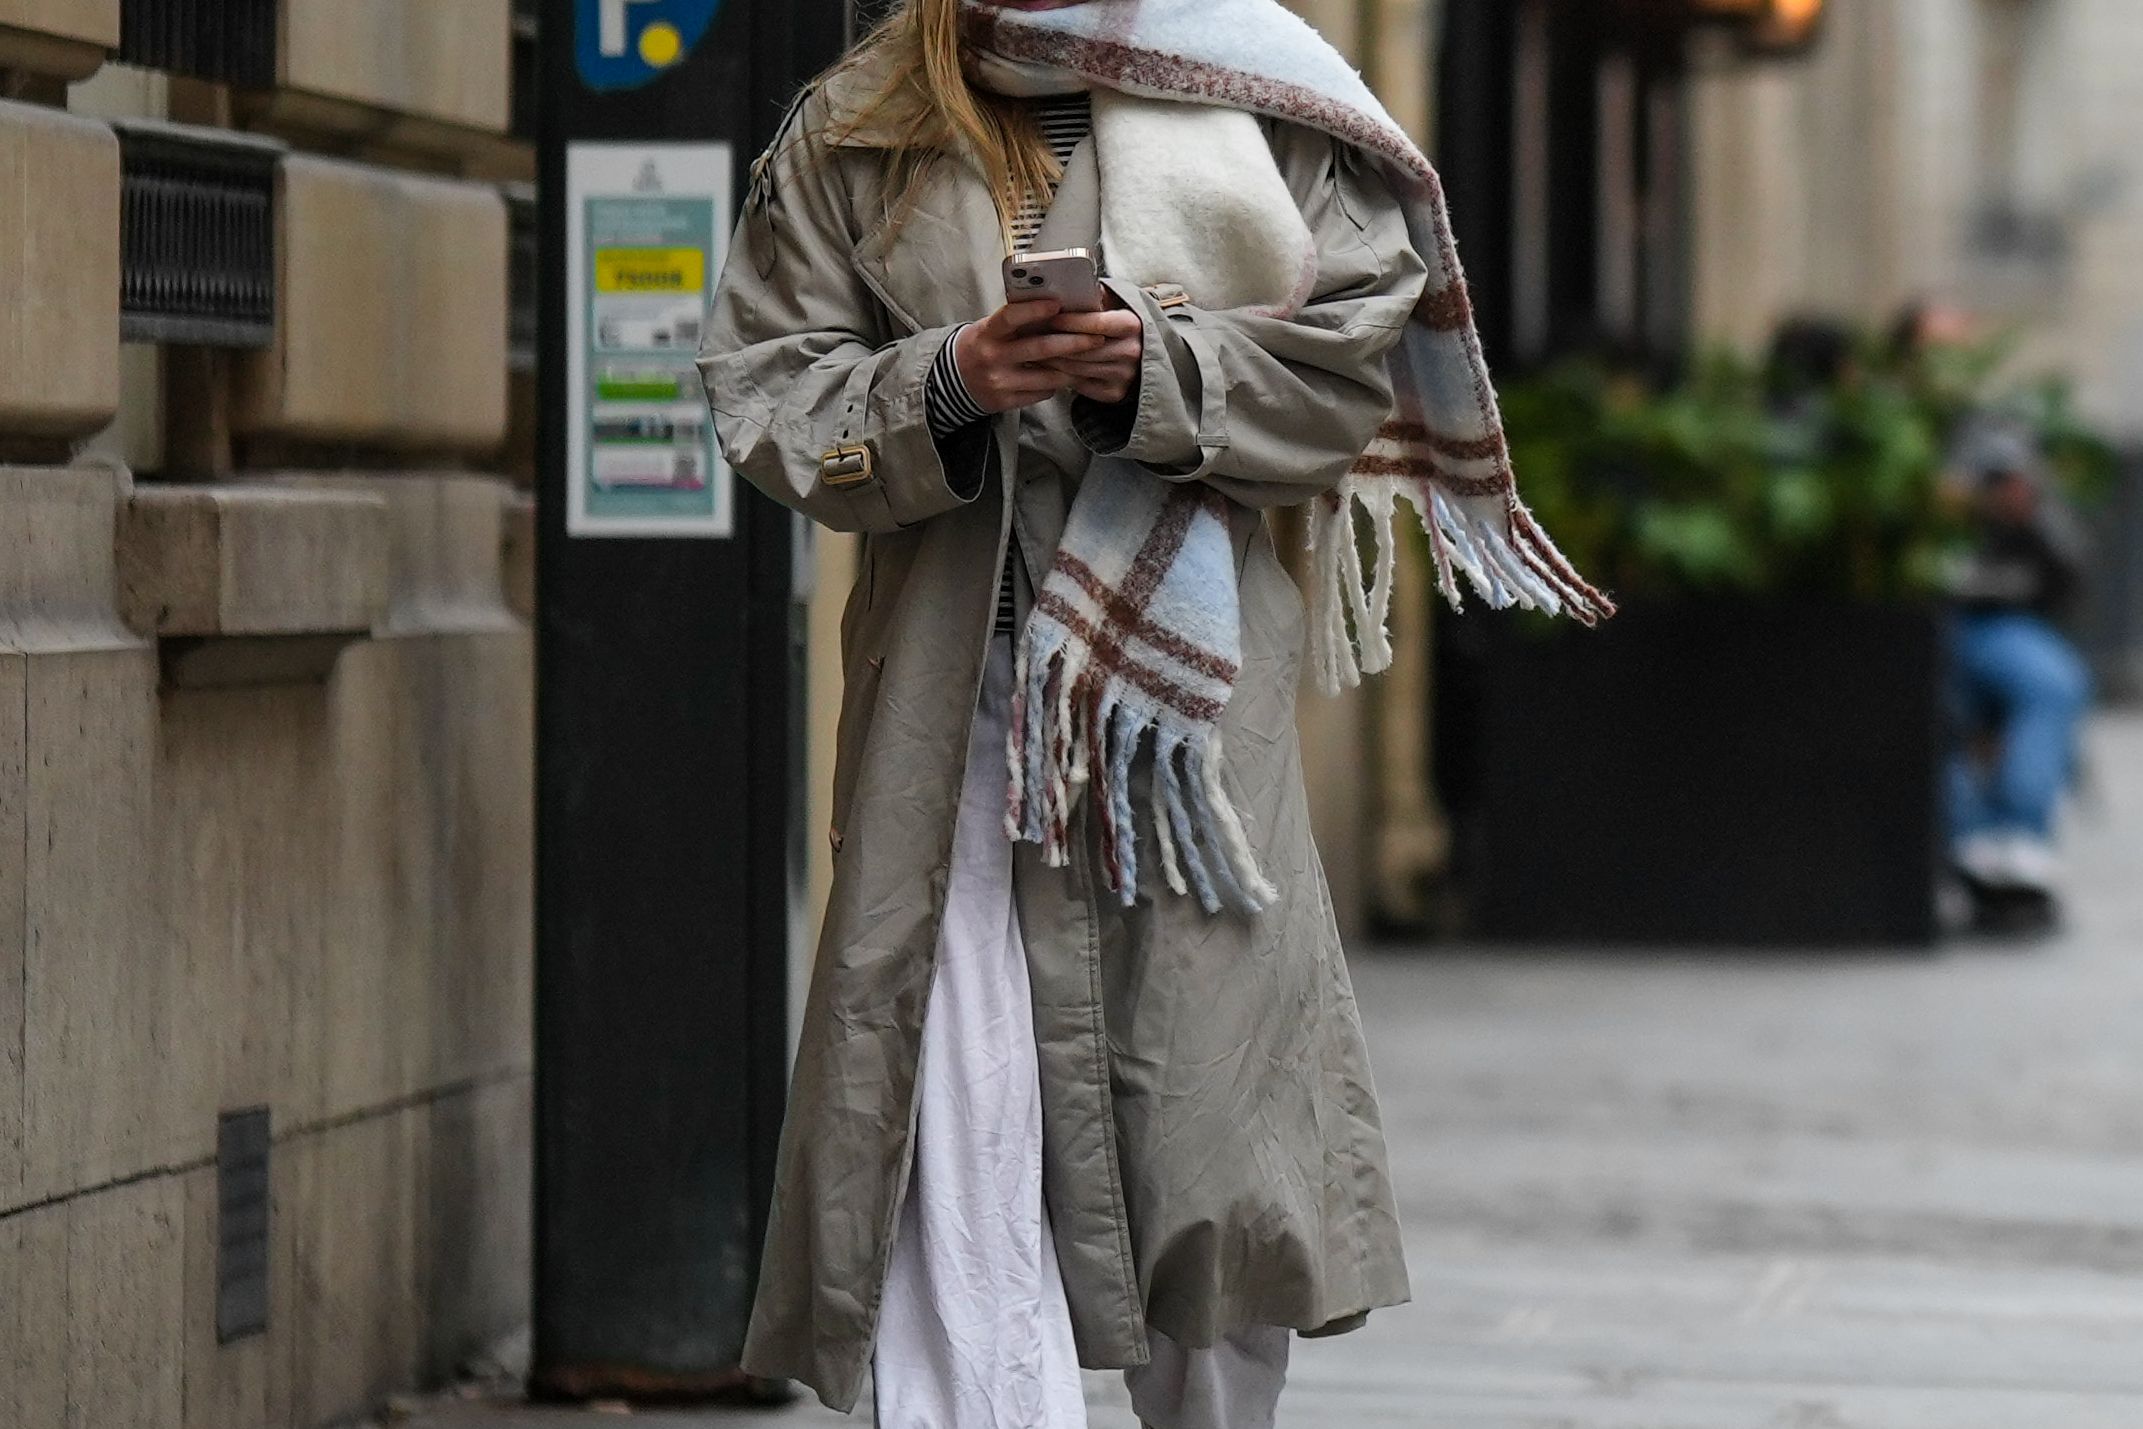 THE CLASSIC WOOL SCARF  Wool scarf outfit, Big scarf outfit, How to wear  scarves